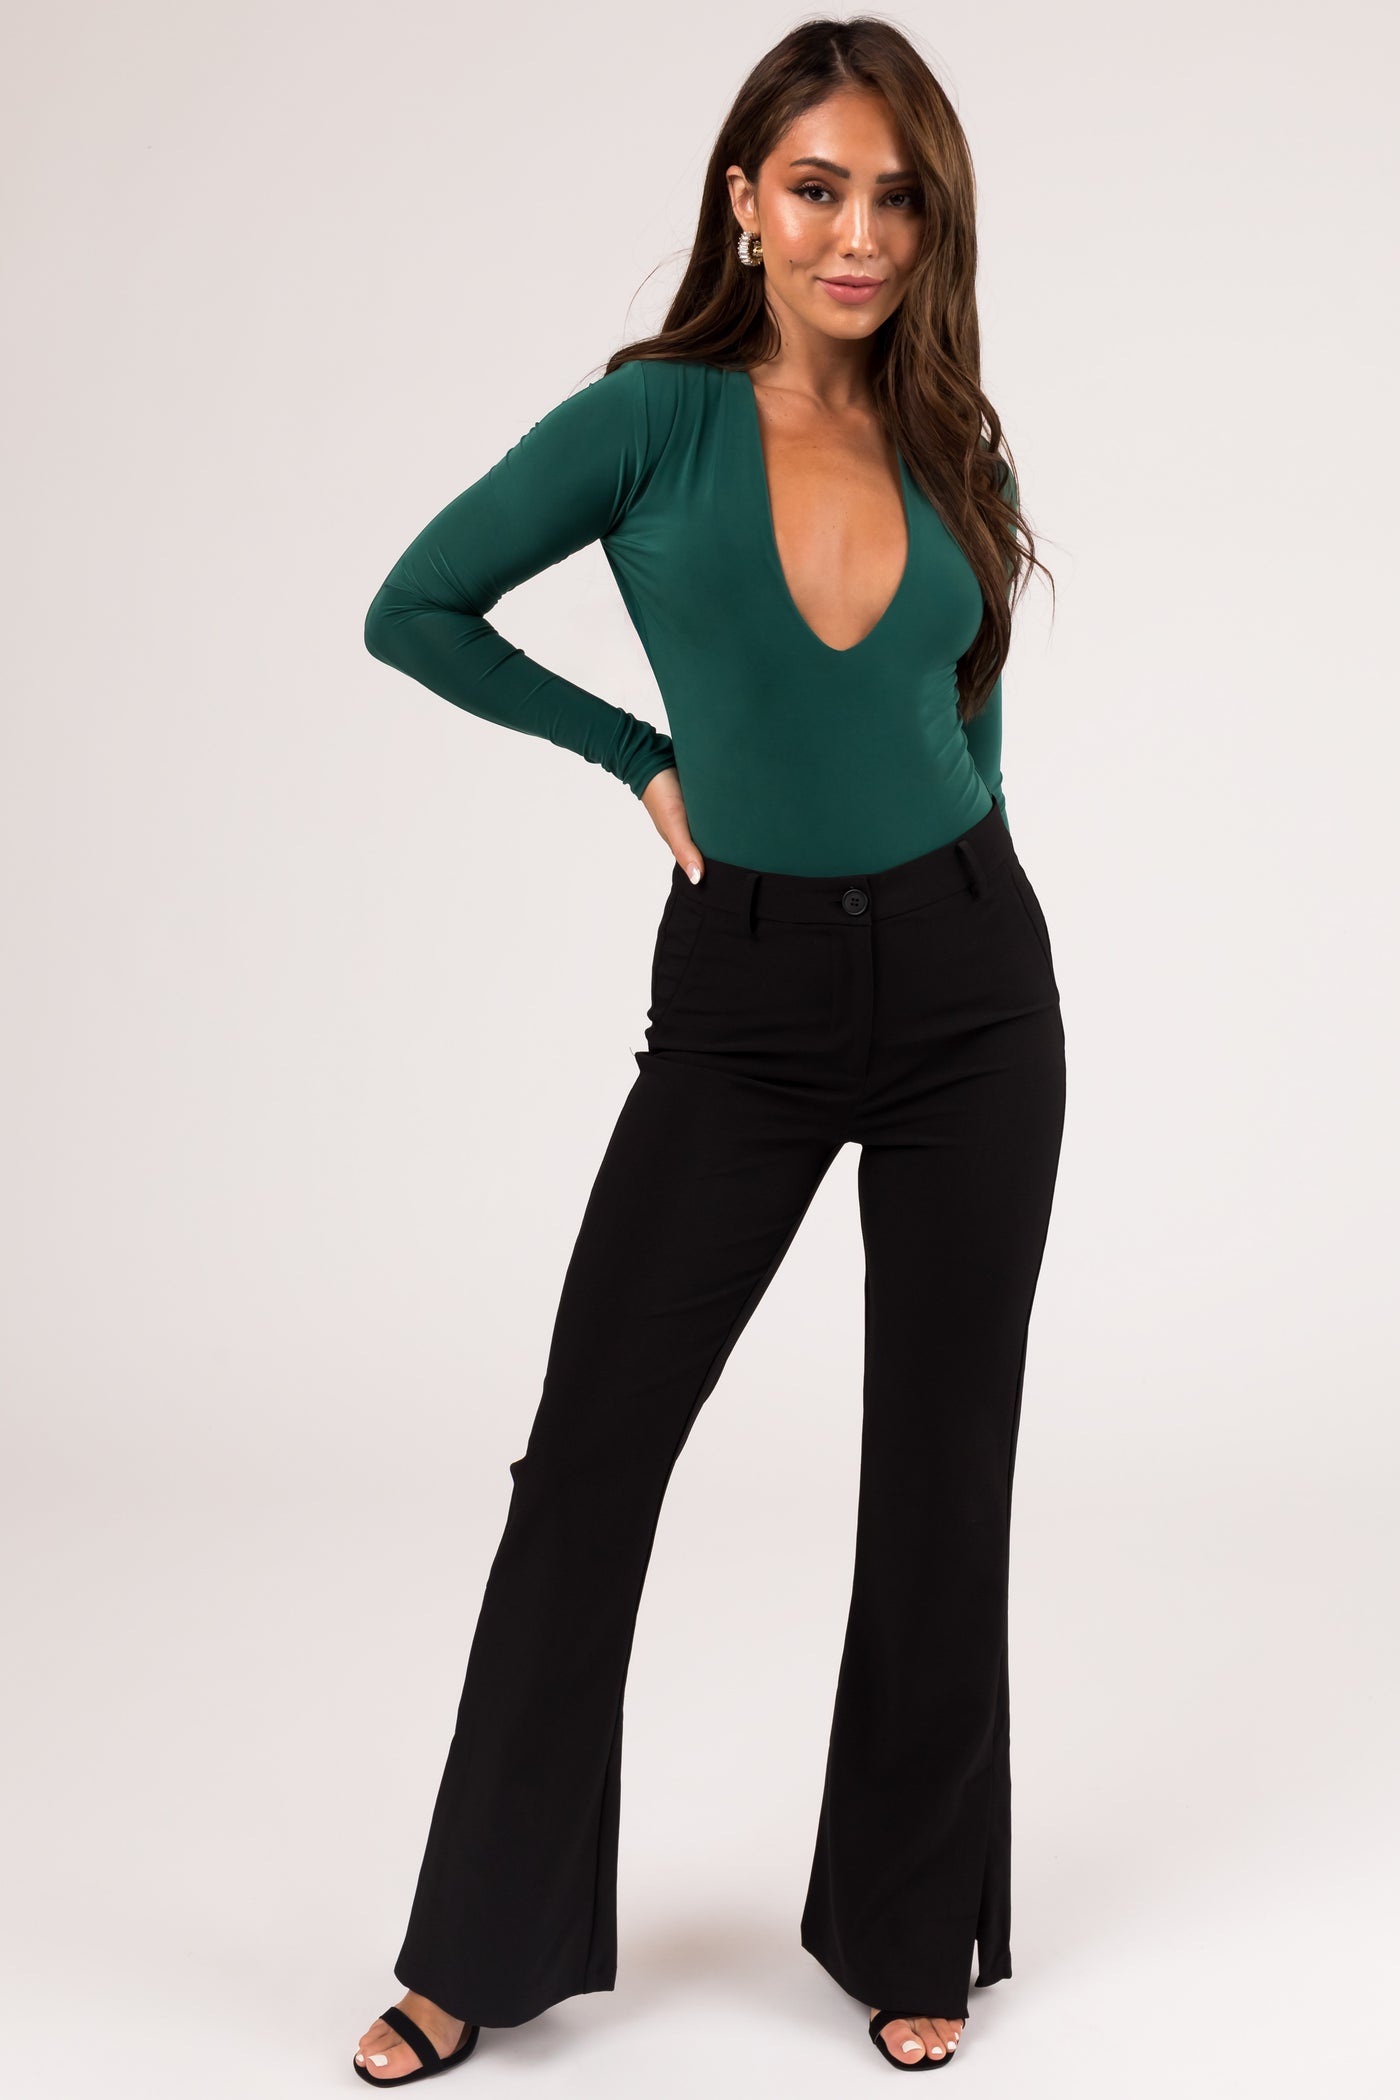 Hunter Green Deep V Bodysuit with Snap Buttons | Lime Lush